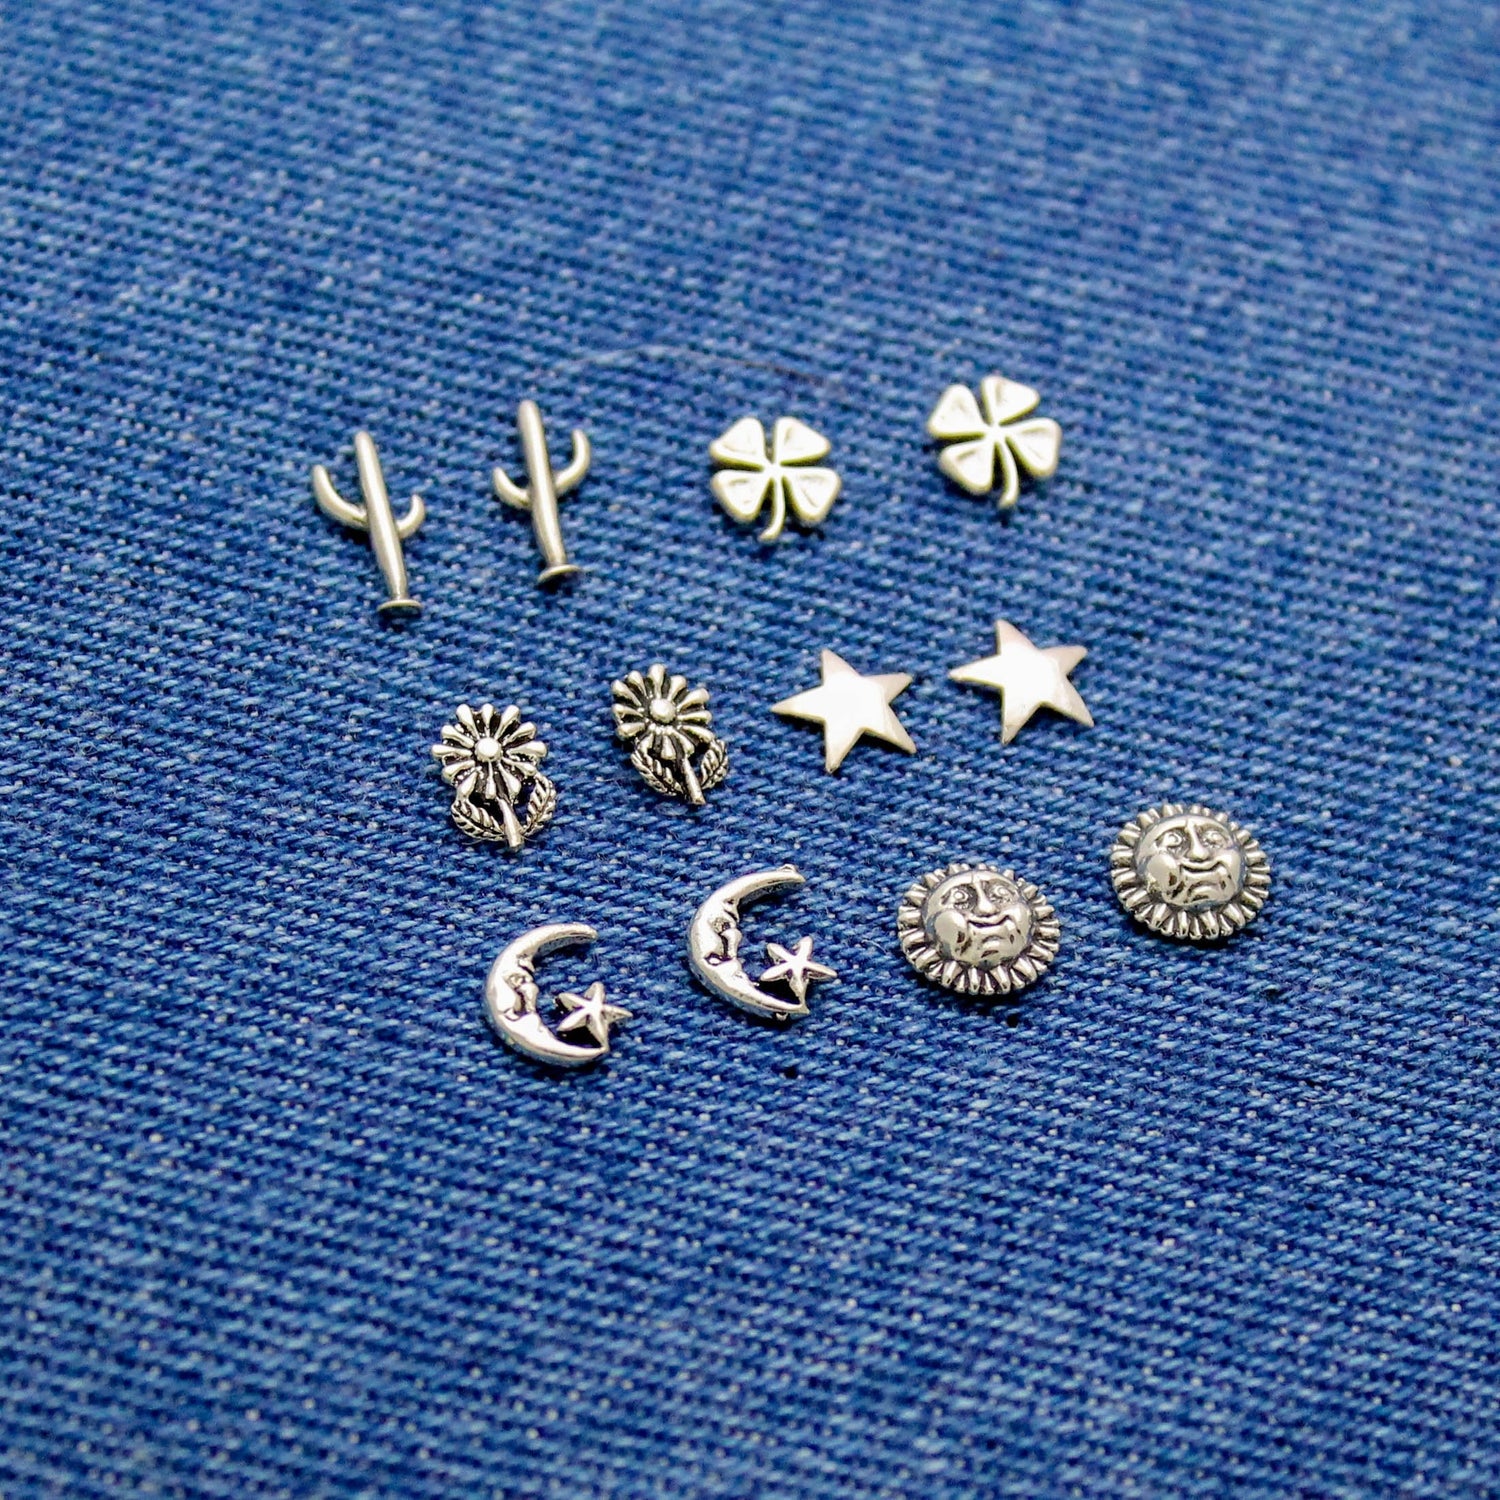 Flower and Celestial Studs in Sterling Silver, Sun, Moon with Stars, Stars, Daisies, Clovers, & Cactus, Silver Stud Earrings, Gift for Her